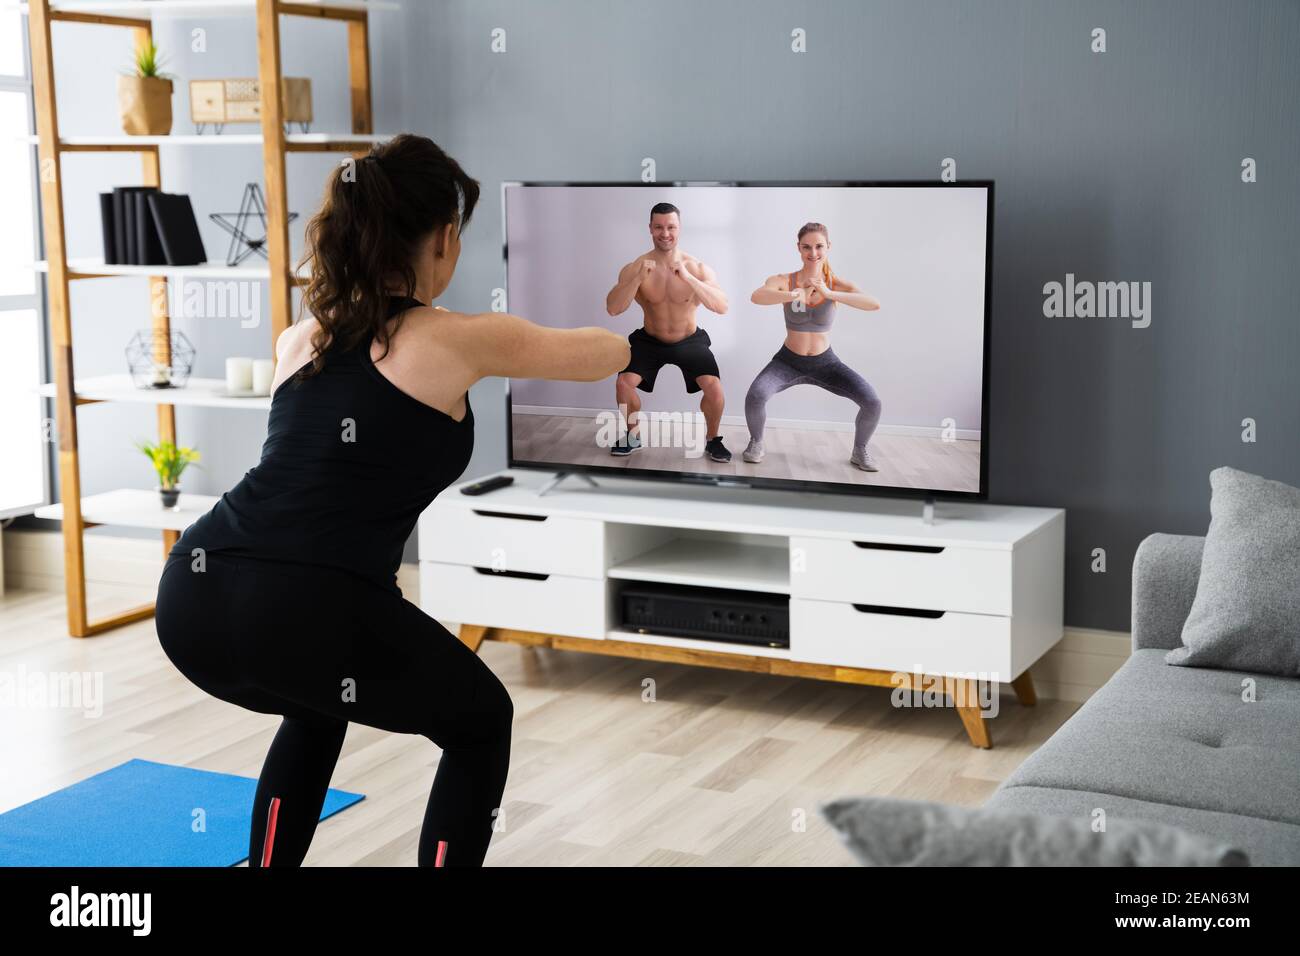 Online TV Home Fitness Workout Stock Photo